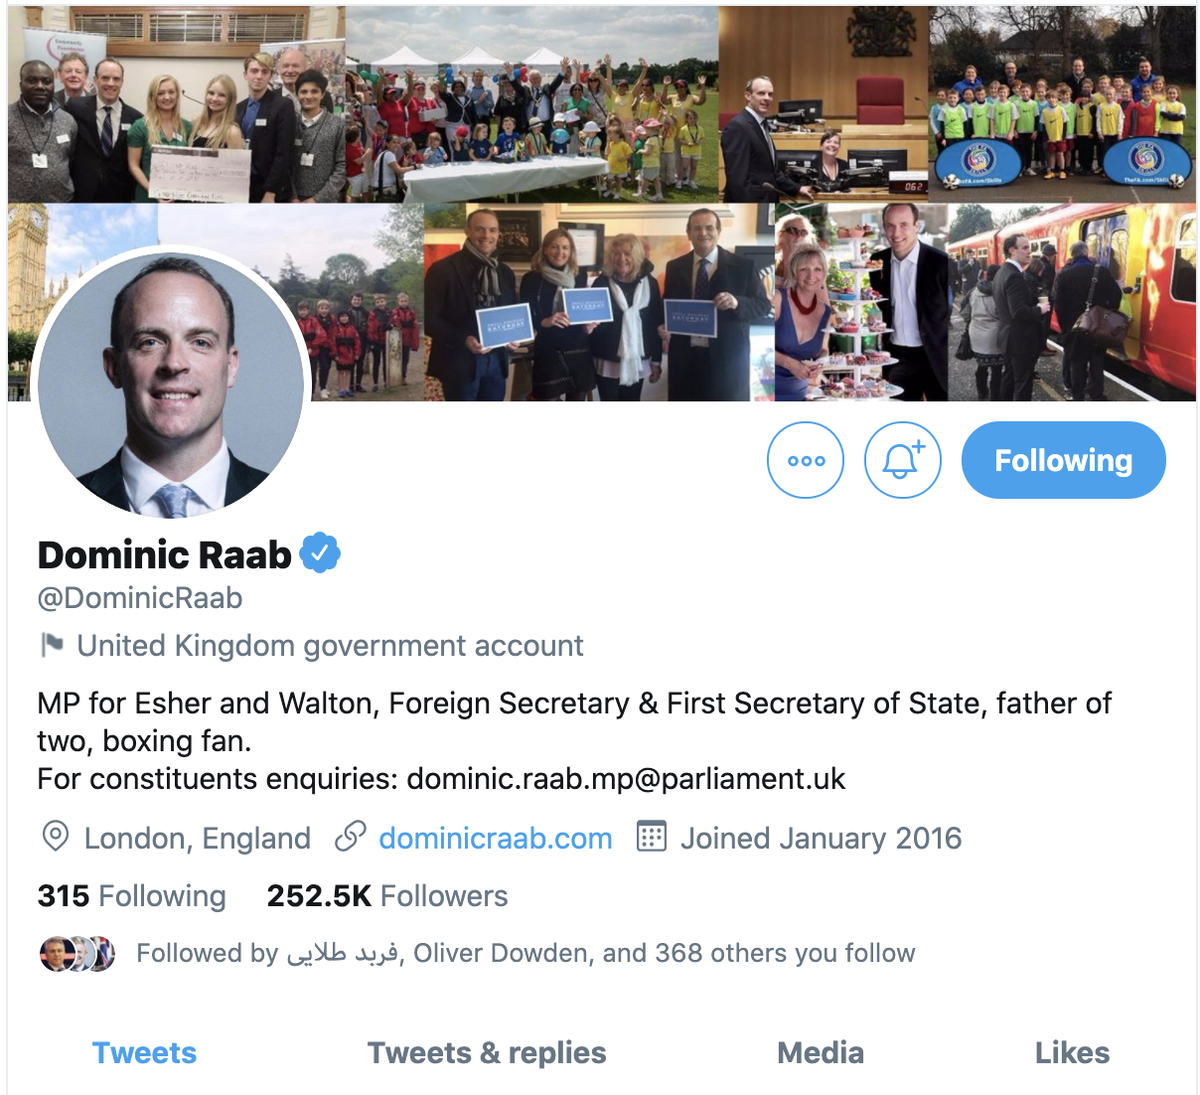 The exact same labelling system has been applied to UK government accounts.  @10DowningStreet has been labelled, but  @BorisJohnson has not. Foreign Secretary  @DominicRaab has also been labelled